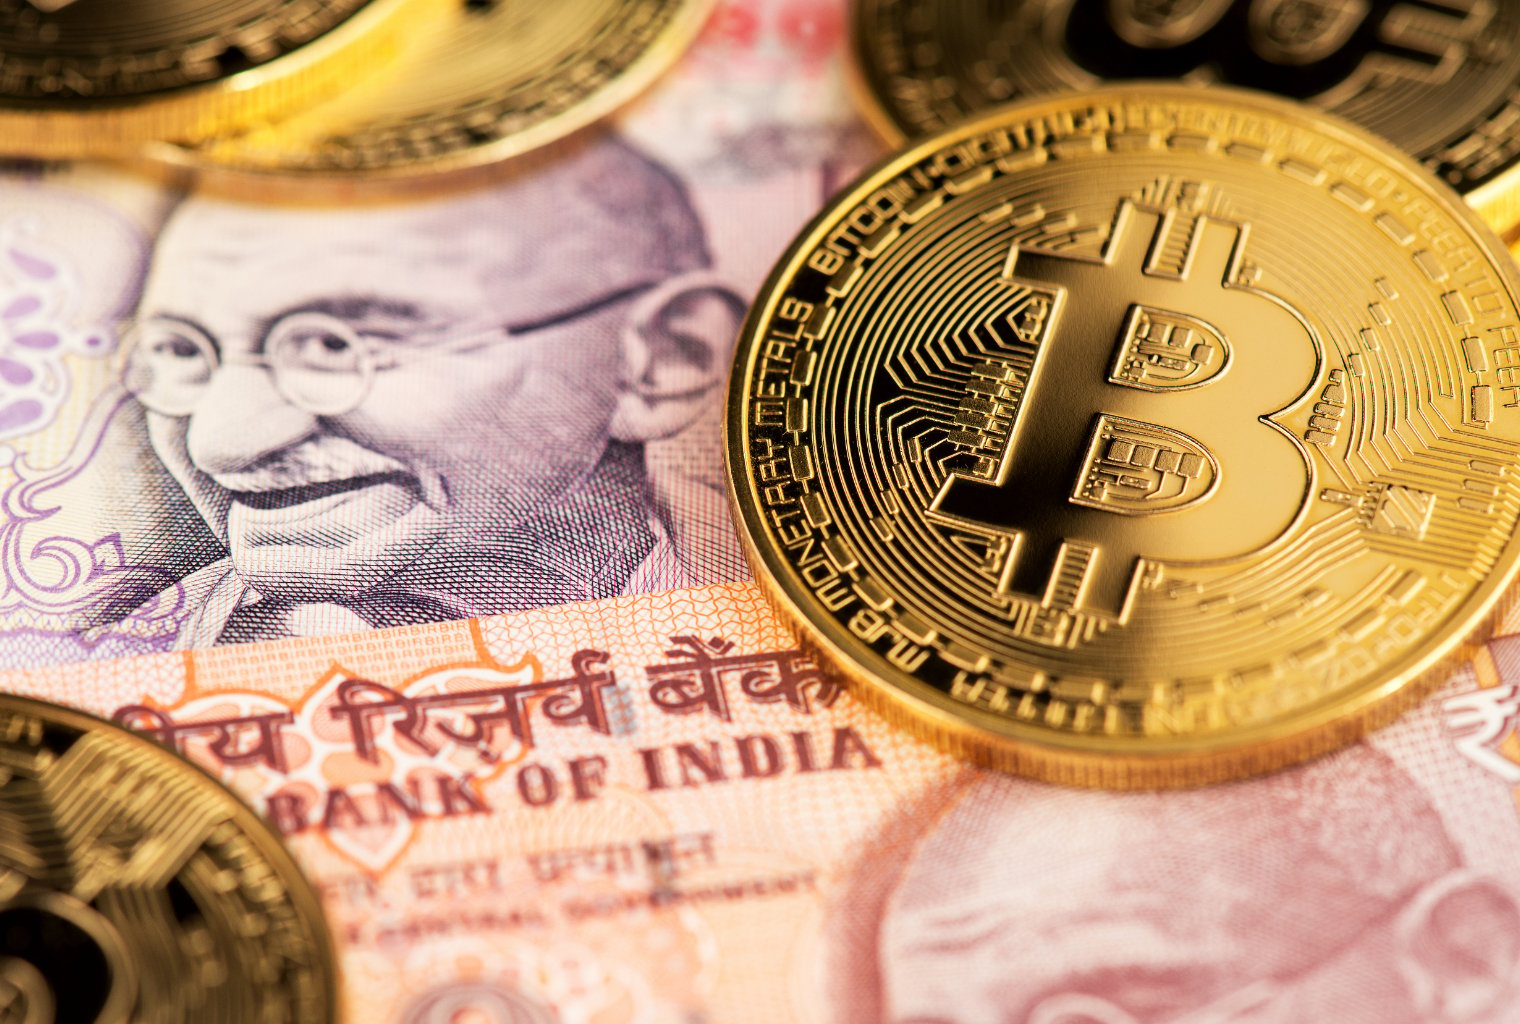 Convert 1 BTC to INR - Bitcoin price in INR | CoinCodex